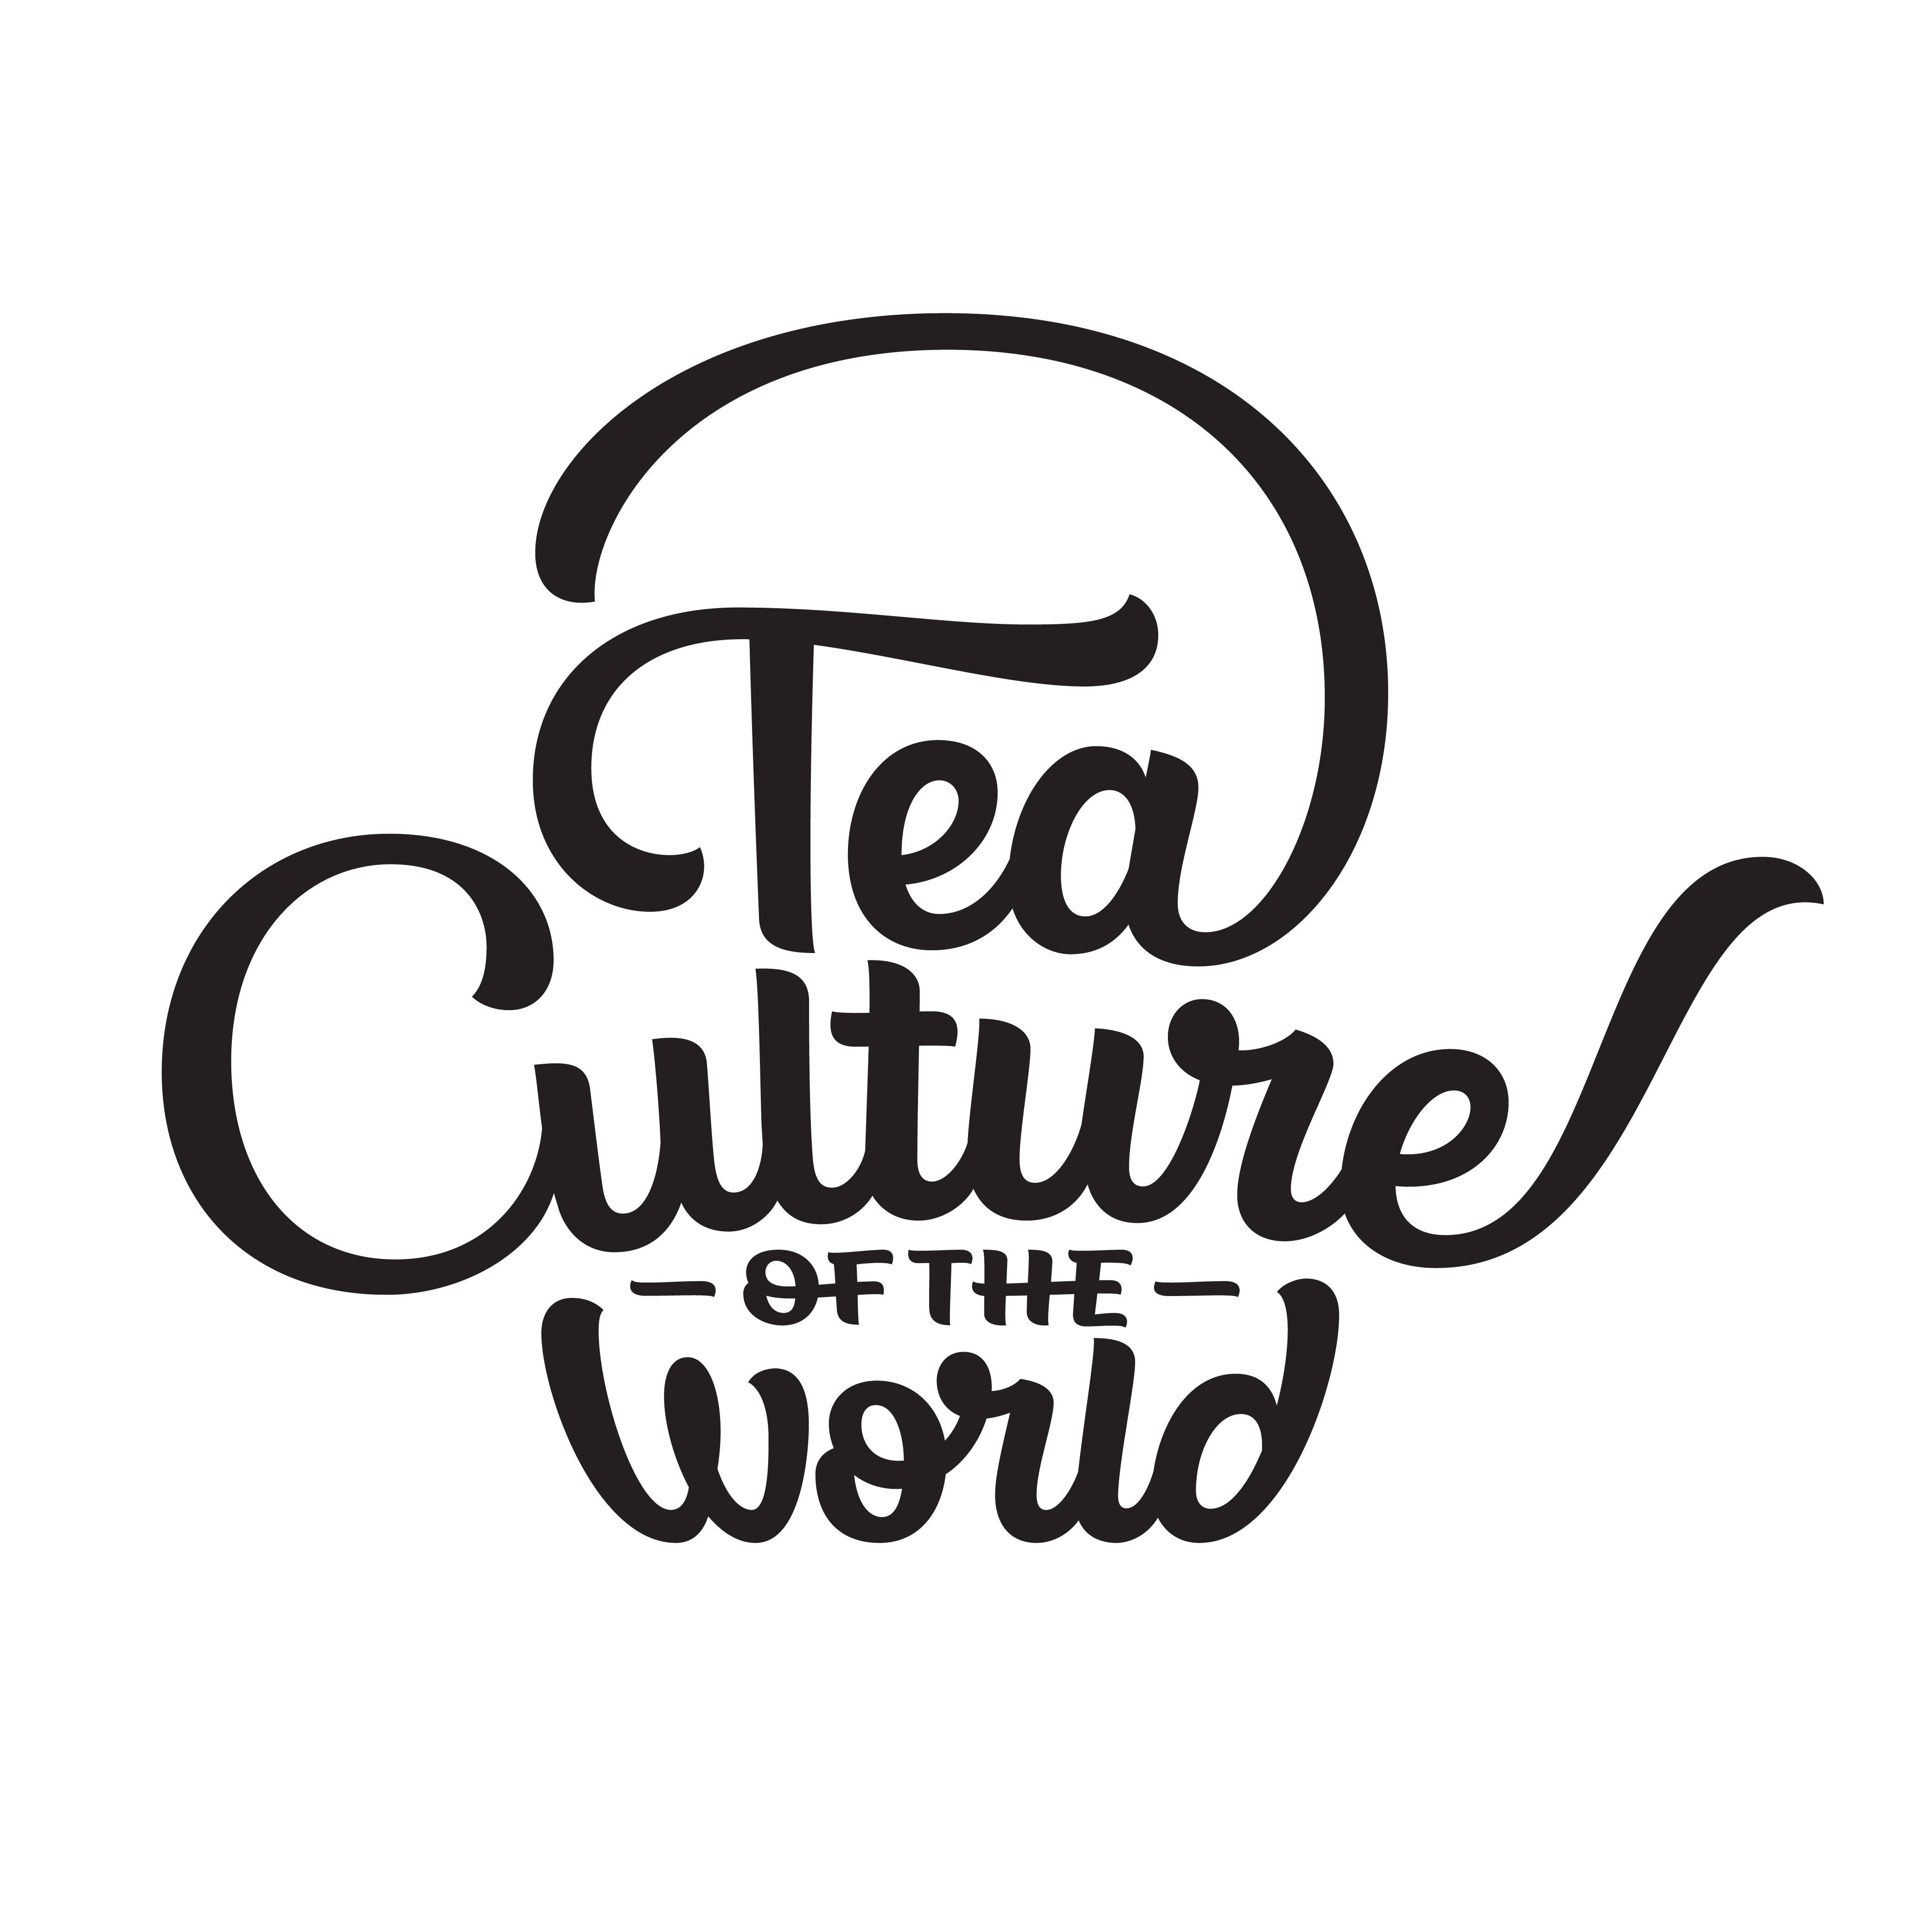 tea culture of the world logotype design by Martina Flor